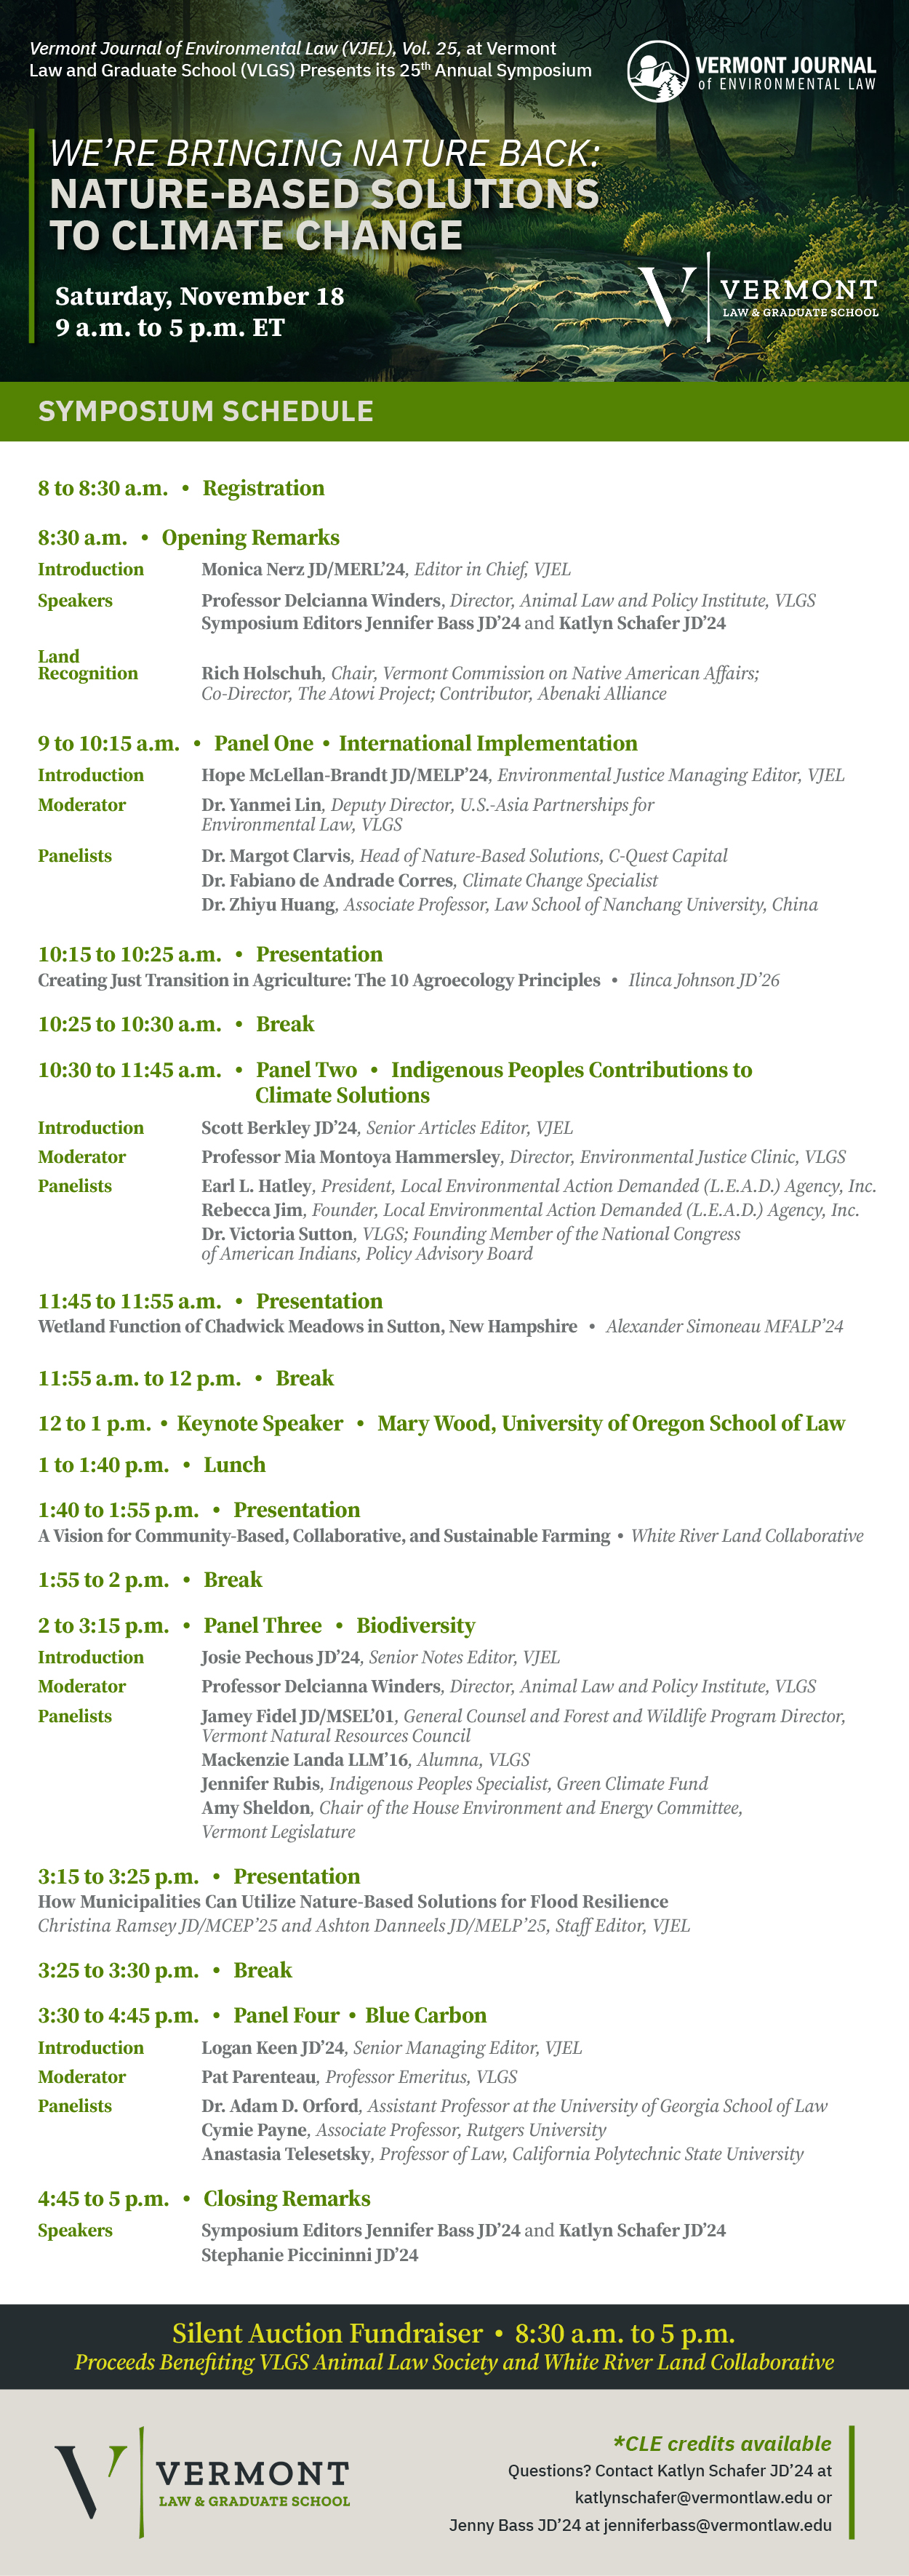 25th Annual Vermont Journal of Environmental Law Symposium